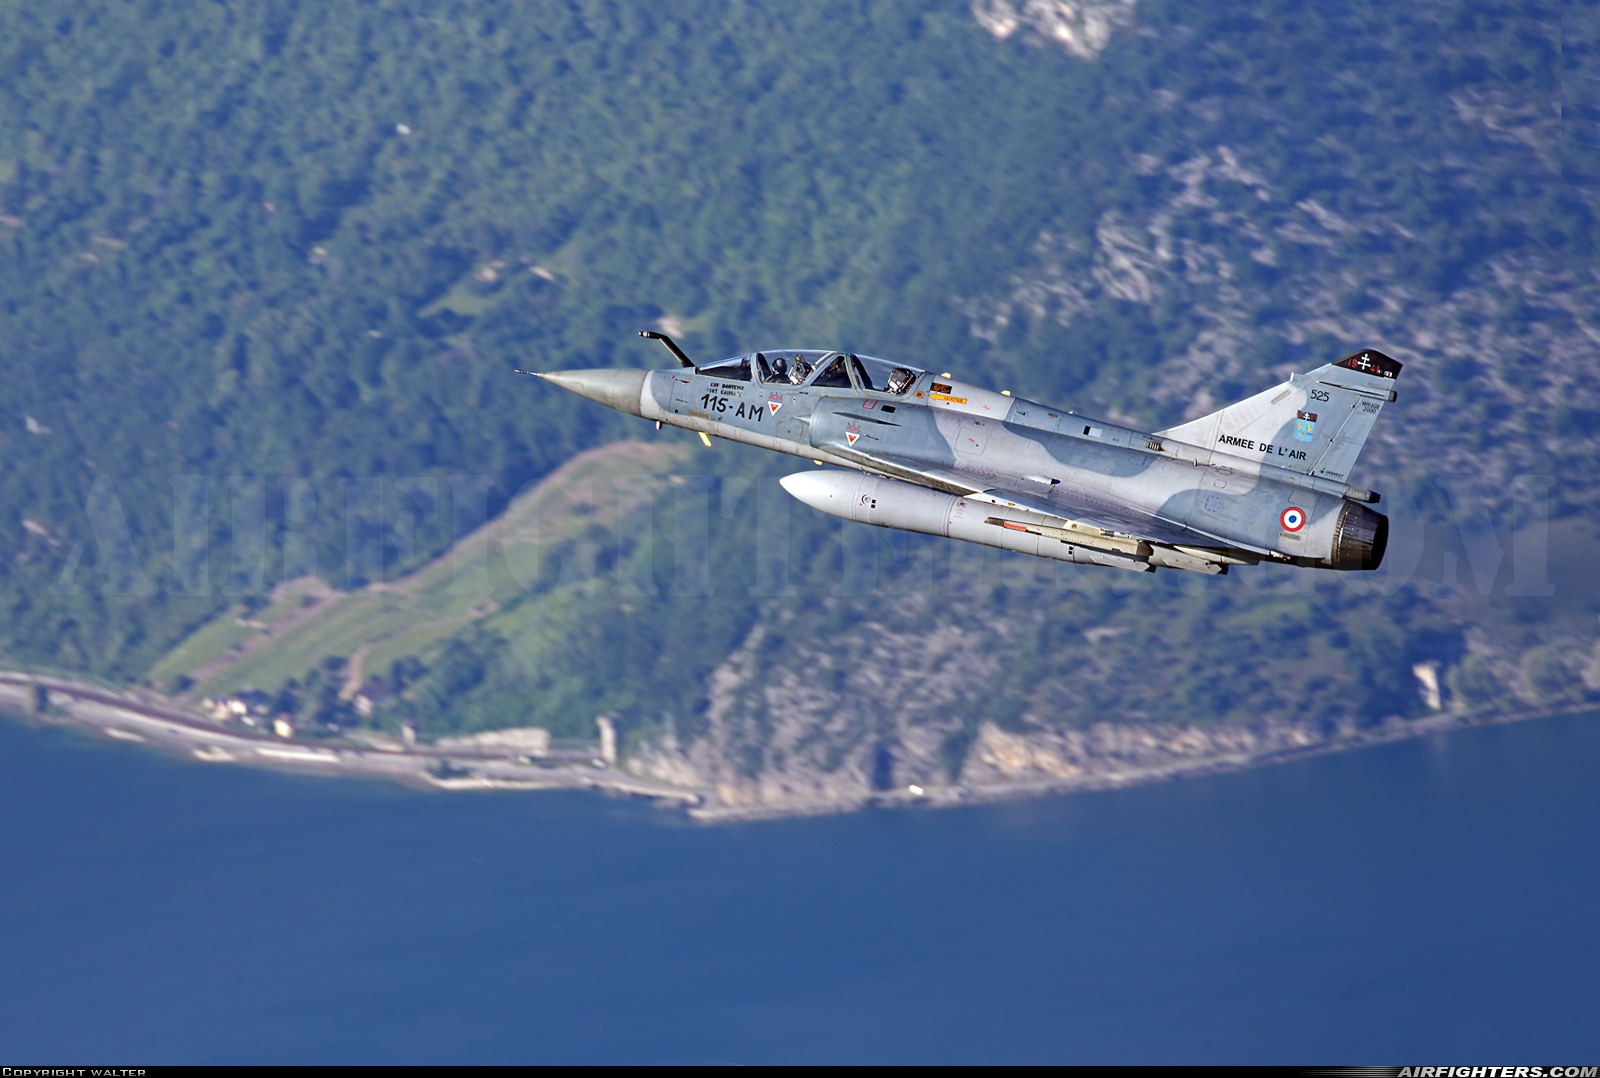 France - Air Force Dassault Mirage 2000B 525 at In Flight, France